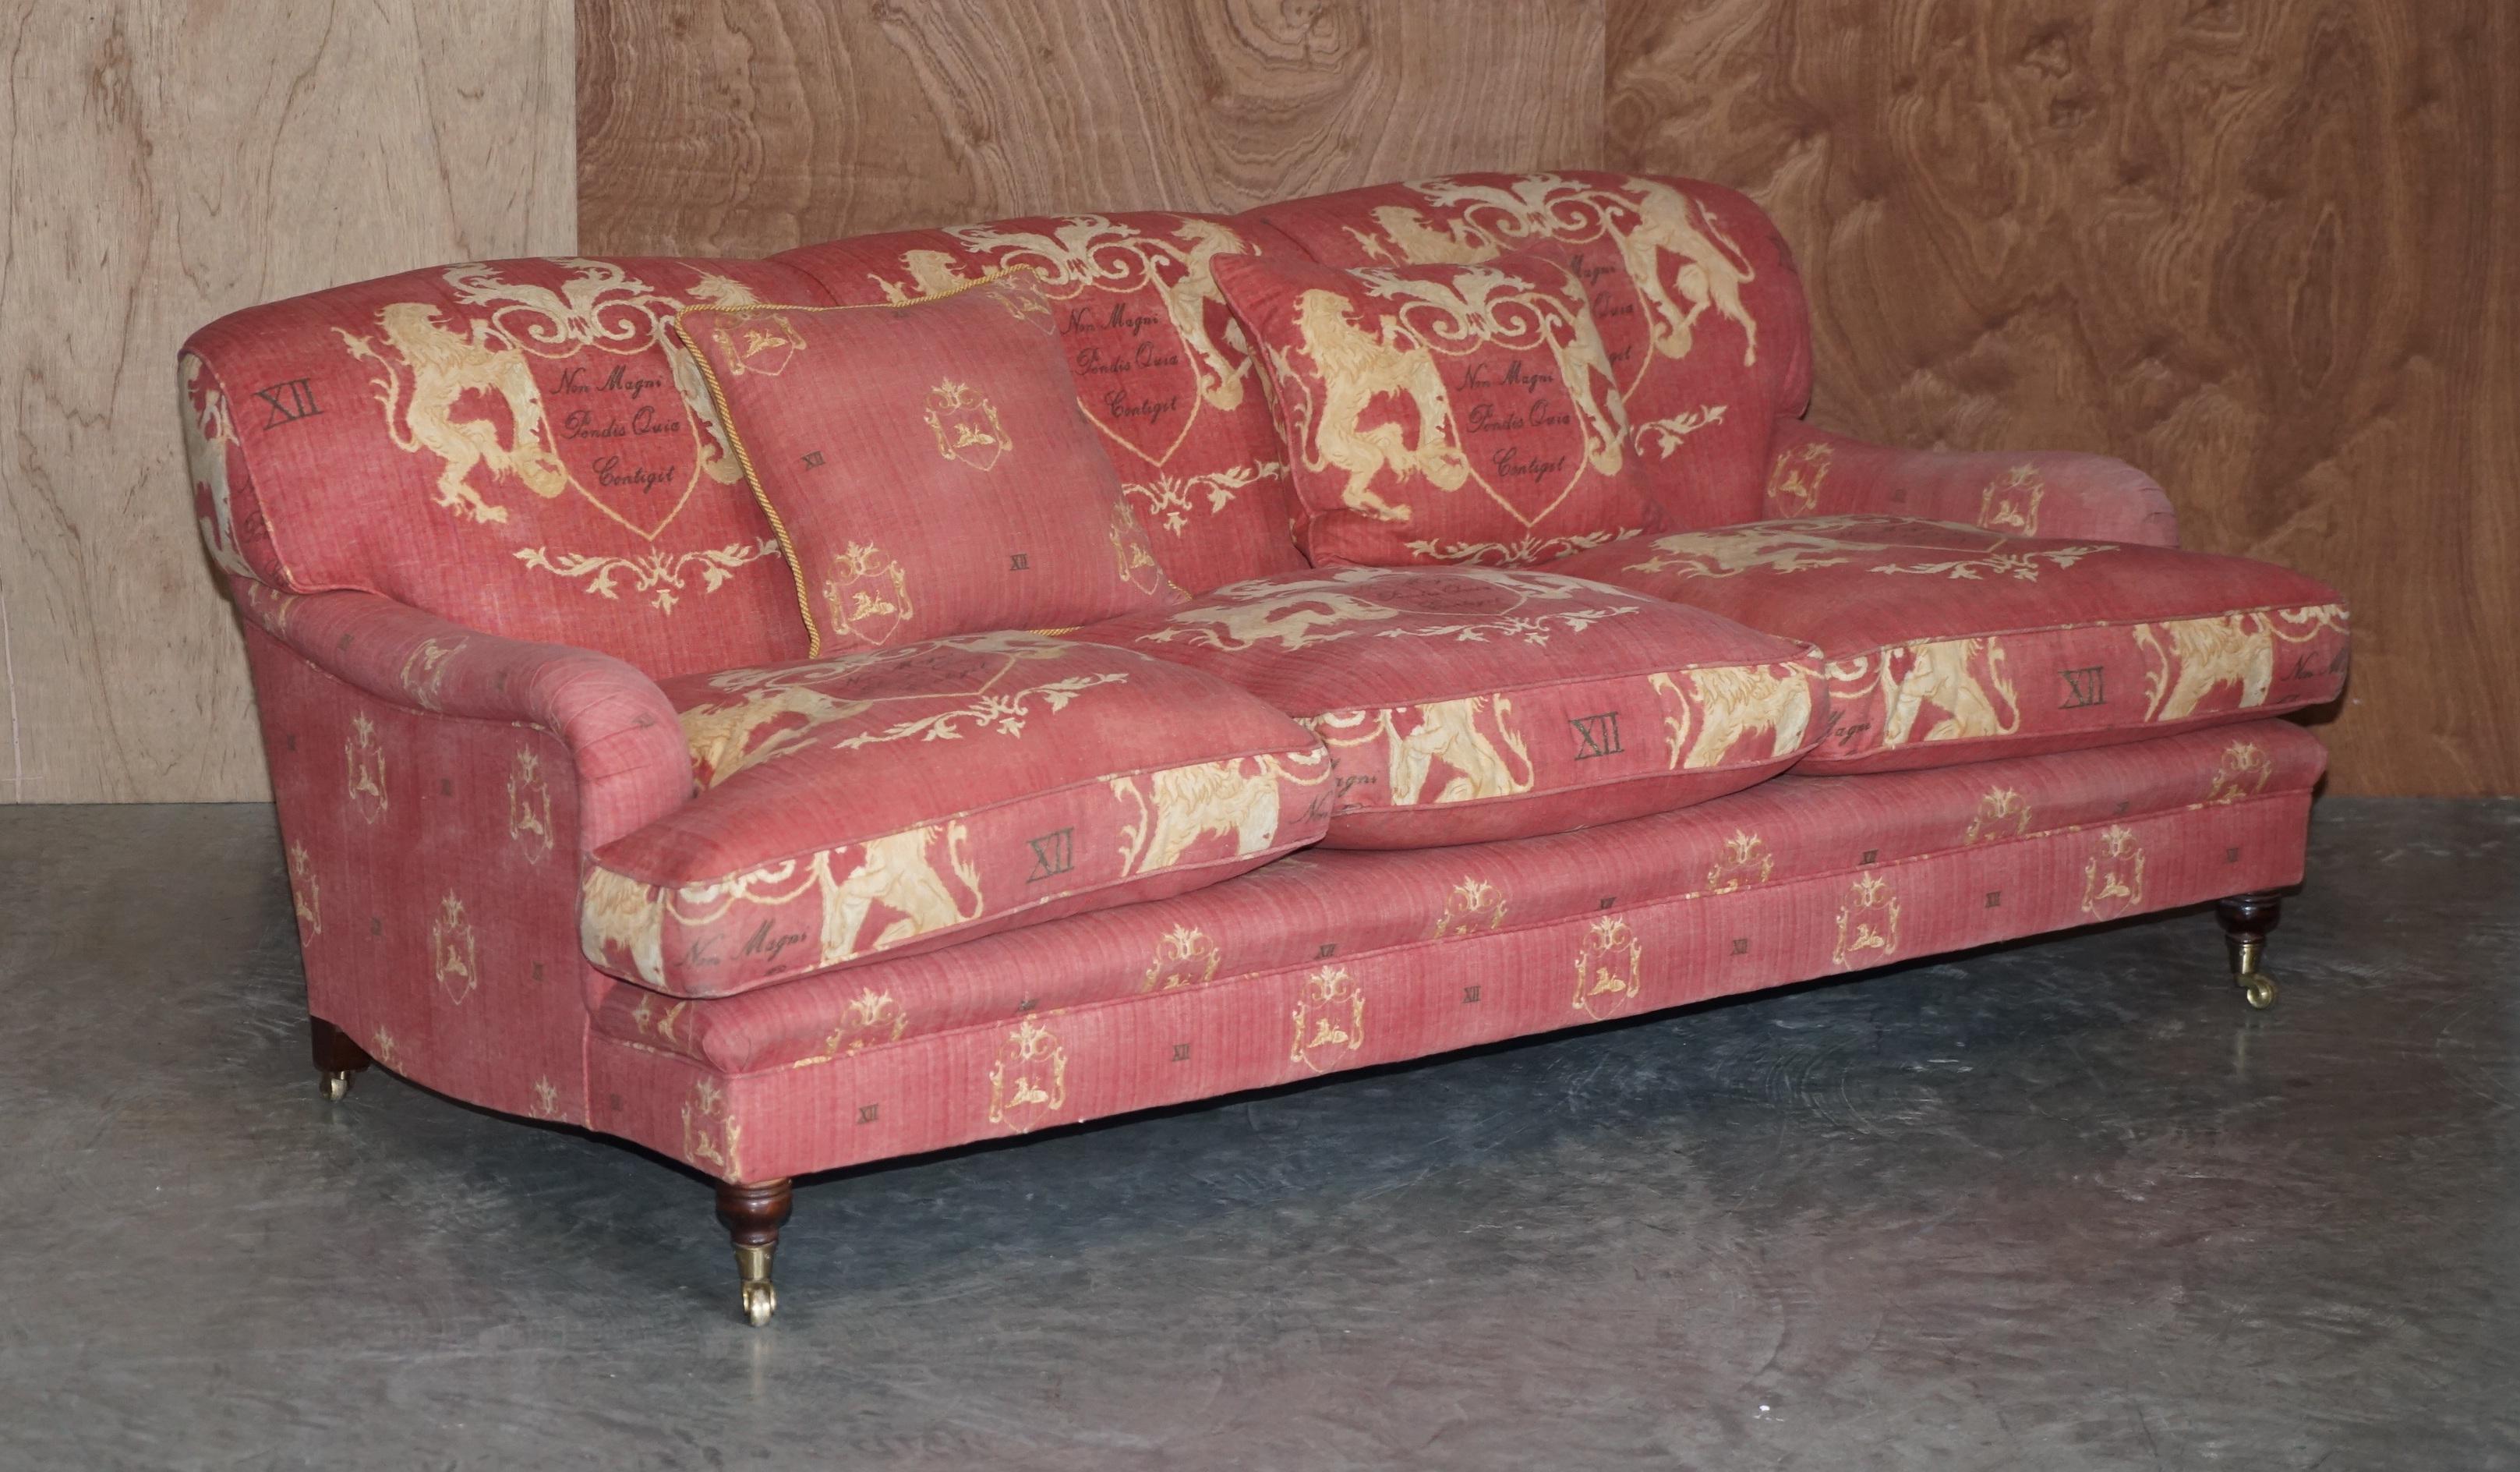 We are delighted to offer for sale this lovely George Smith / Howard style scroll arm sofa with armorial crest / coat of arms upholstery 

This is a very finely made sofa, most likely from George Smith however it has been bought as a frame only